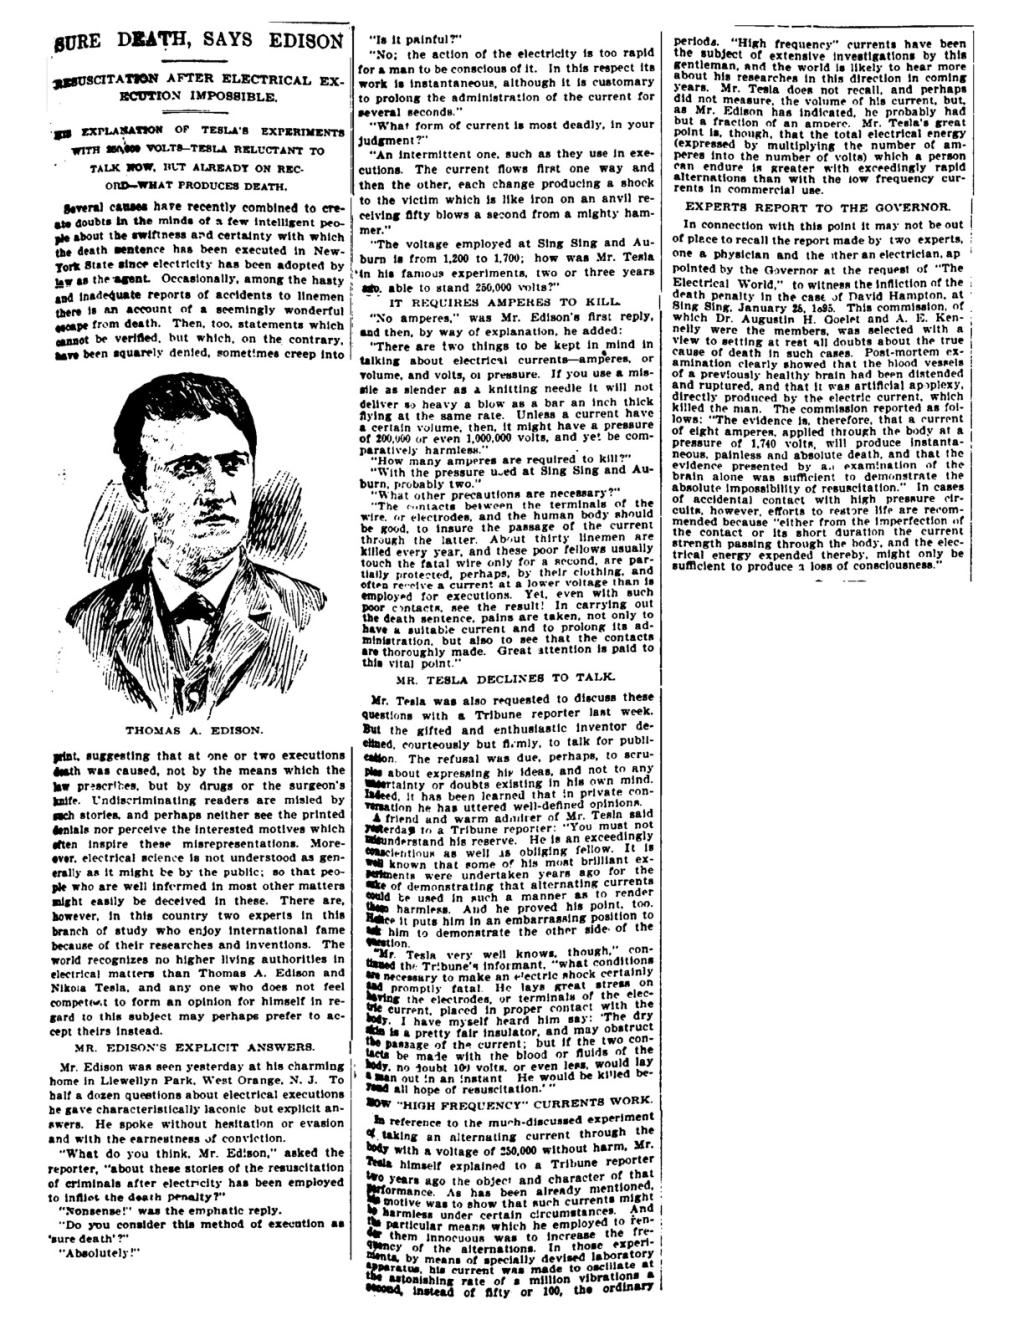 Preview of Resuscitaion After Electrical Execution Impossible - Sure Death, Says Edison article